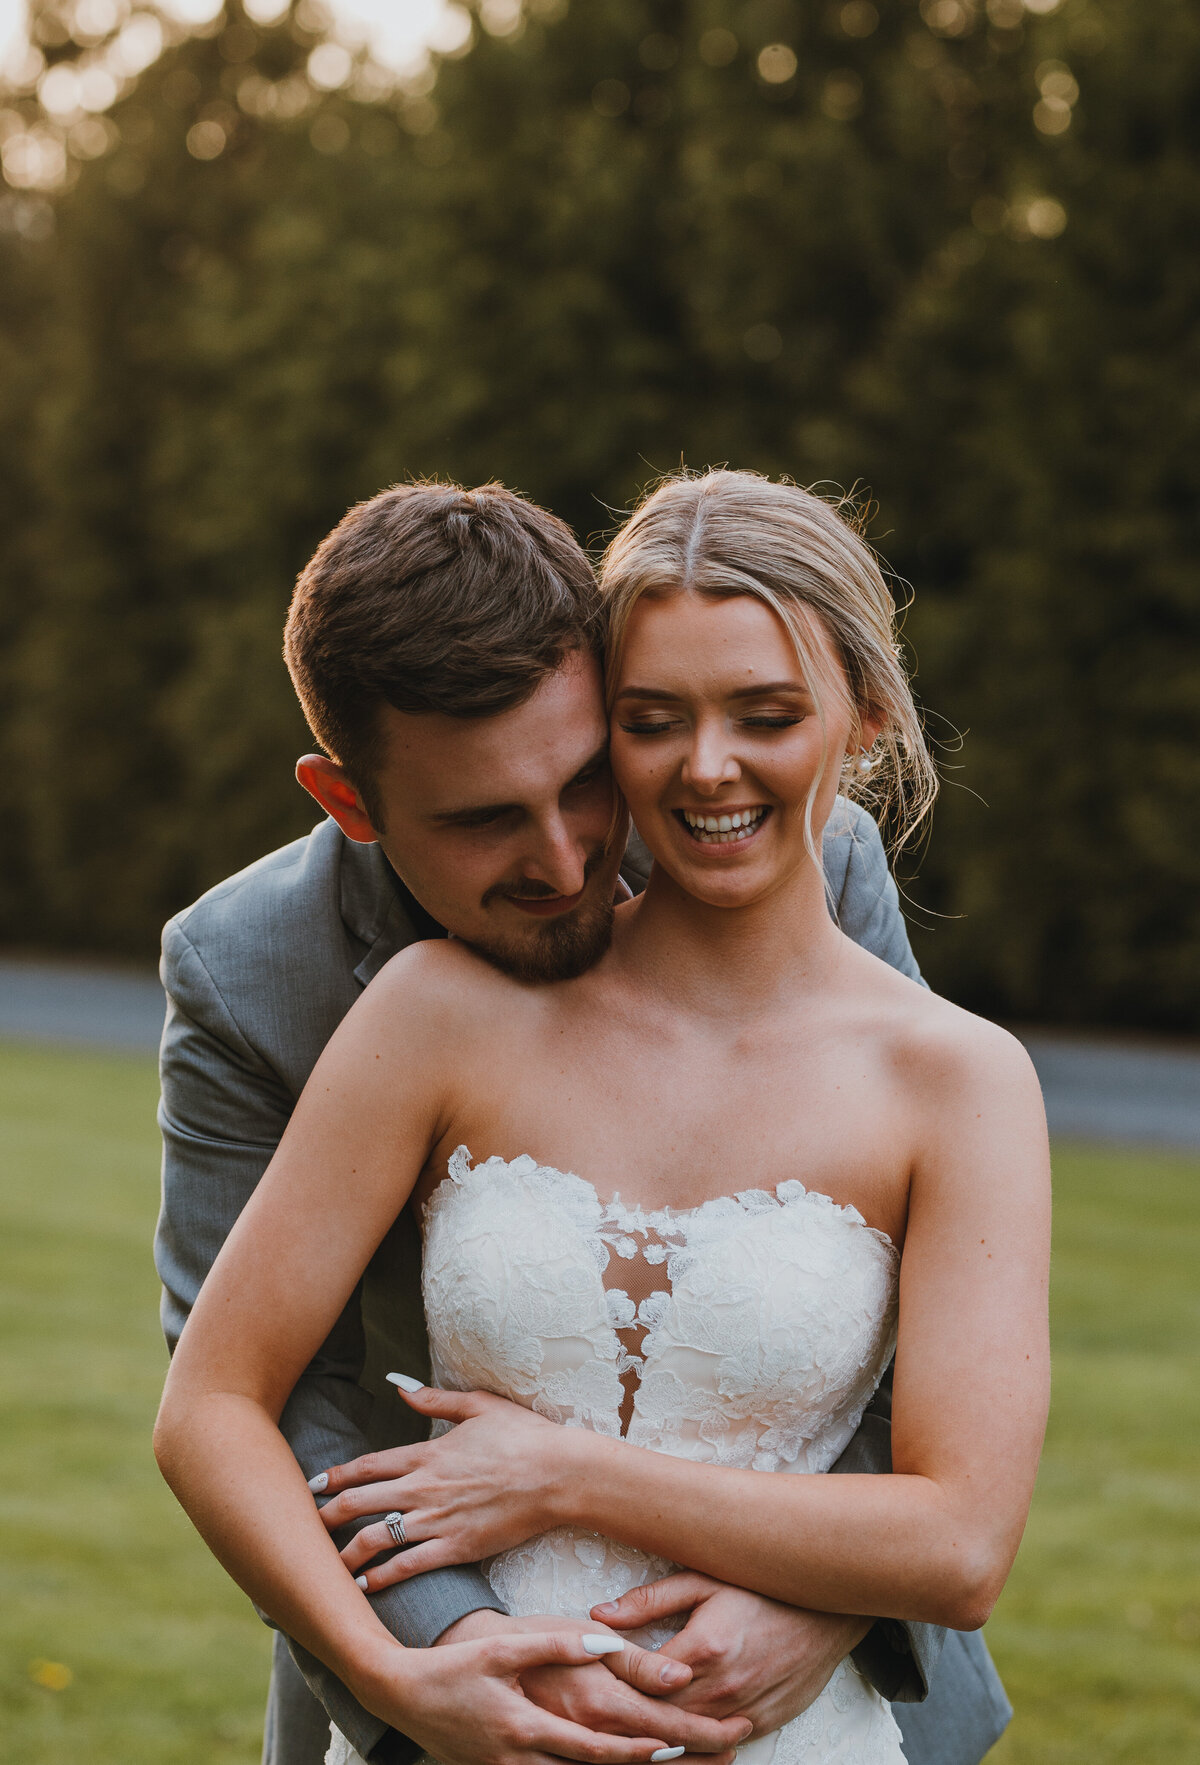 Groom holding bride from behind smiling